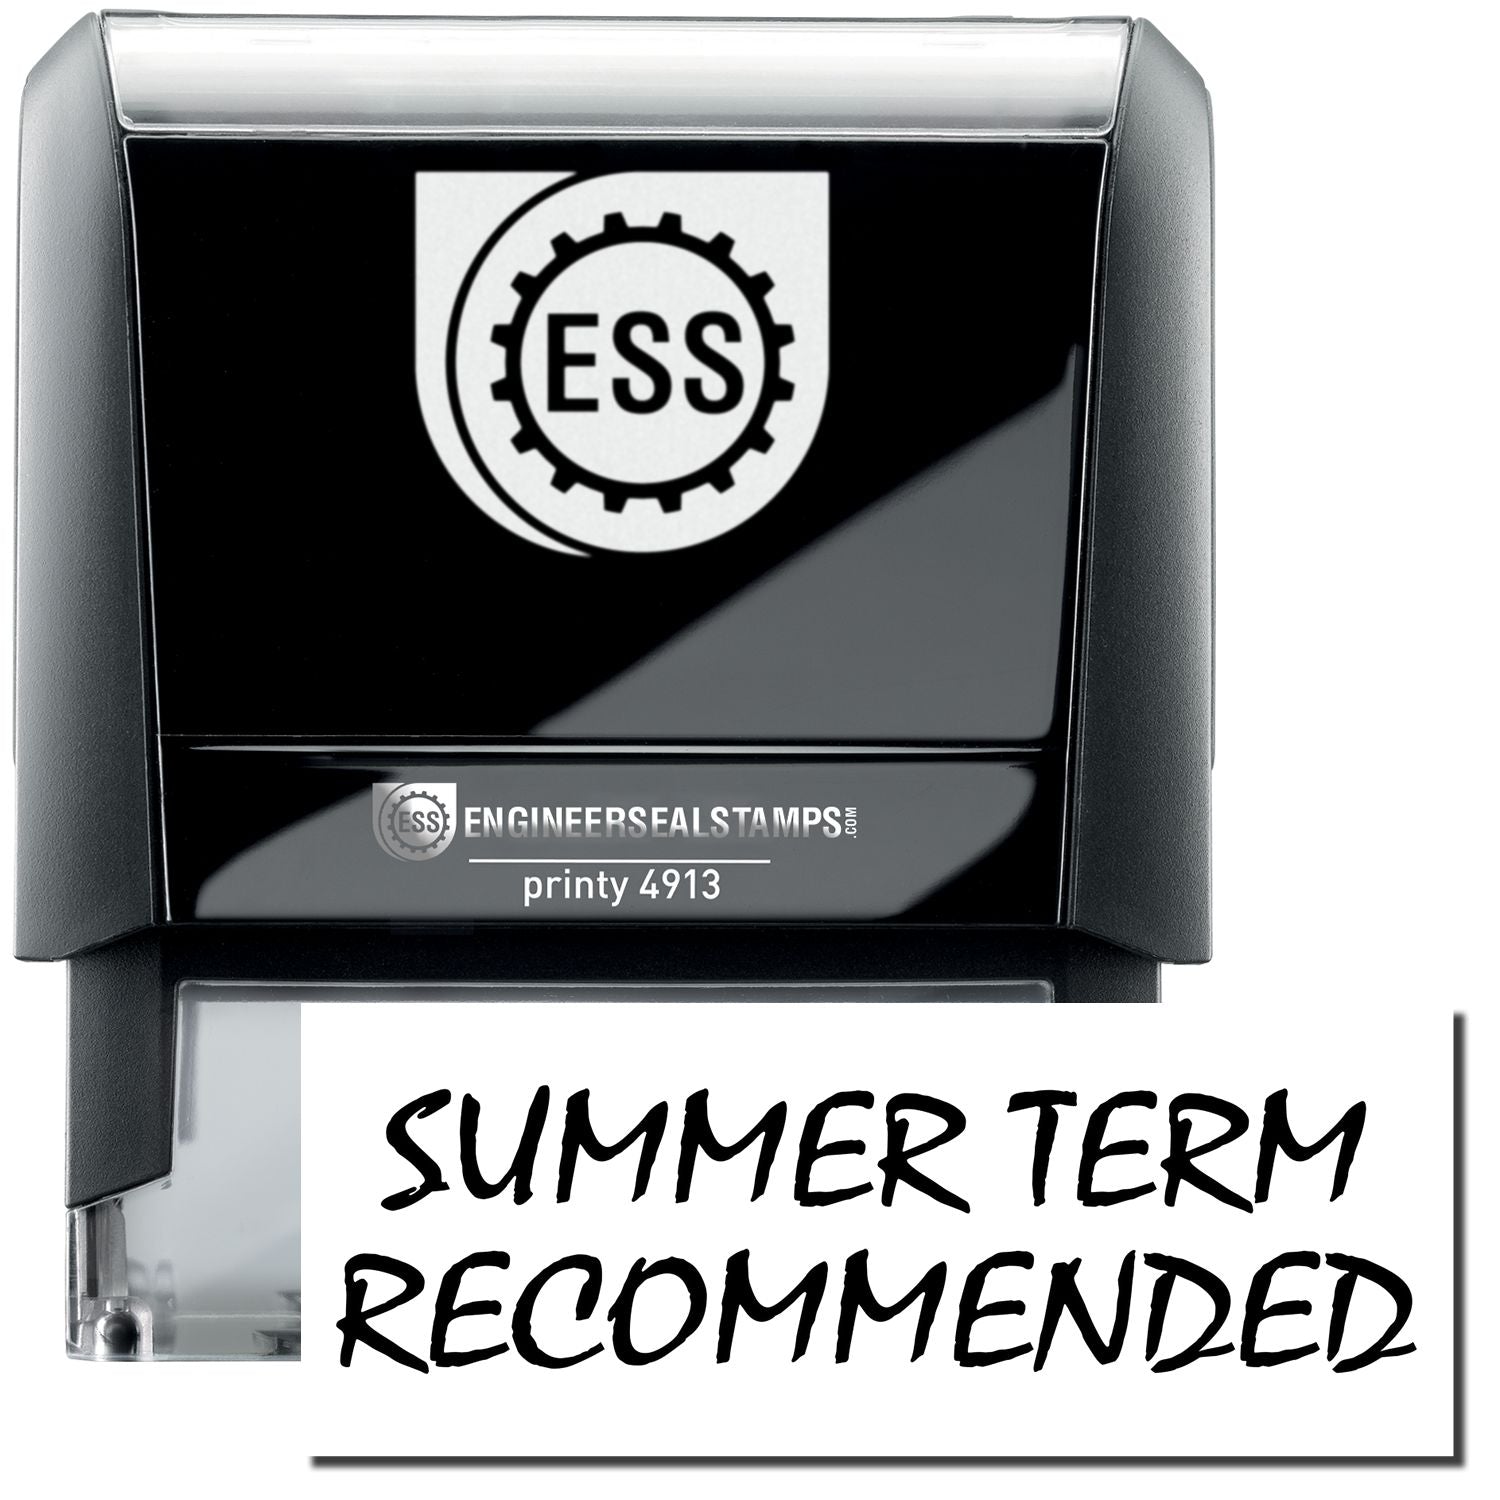 A self-inking stamp with a stamped image showing how the text "SUMMER TERM RECOMMENDED" in a large bold font is displayed by it.